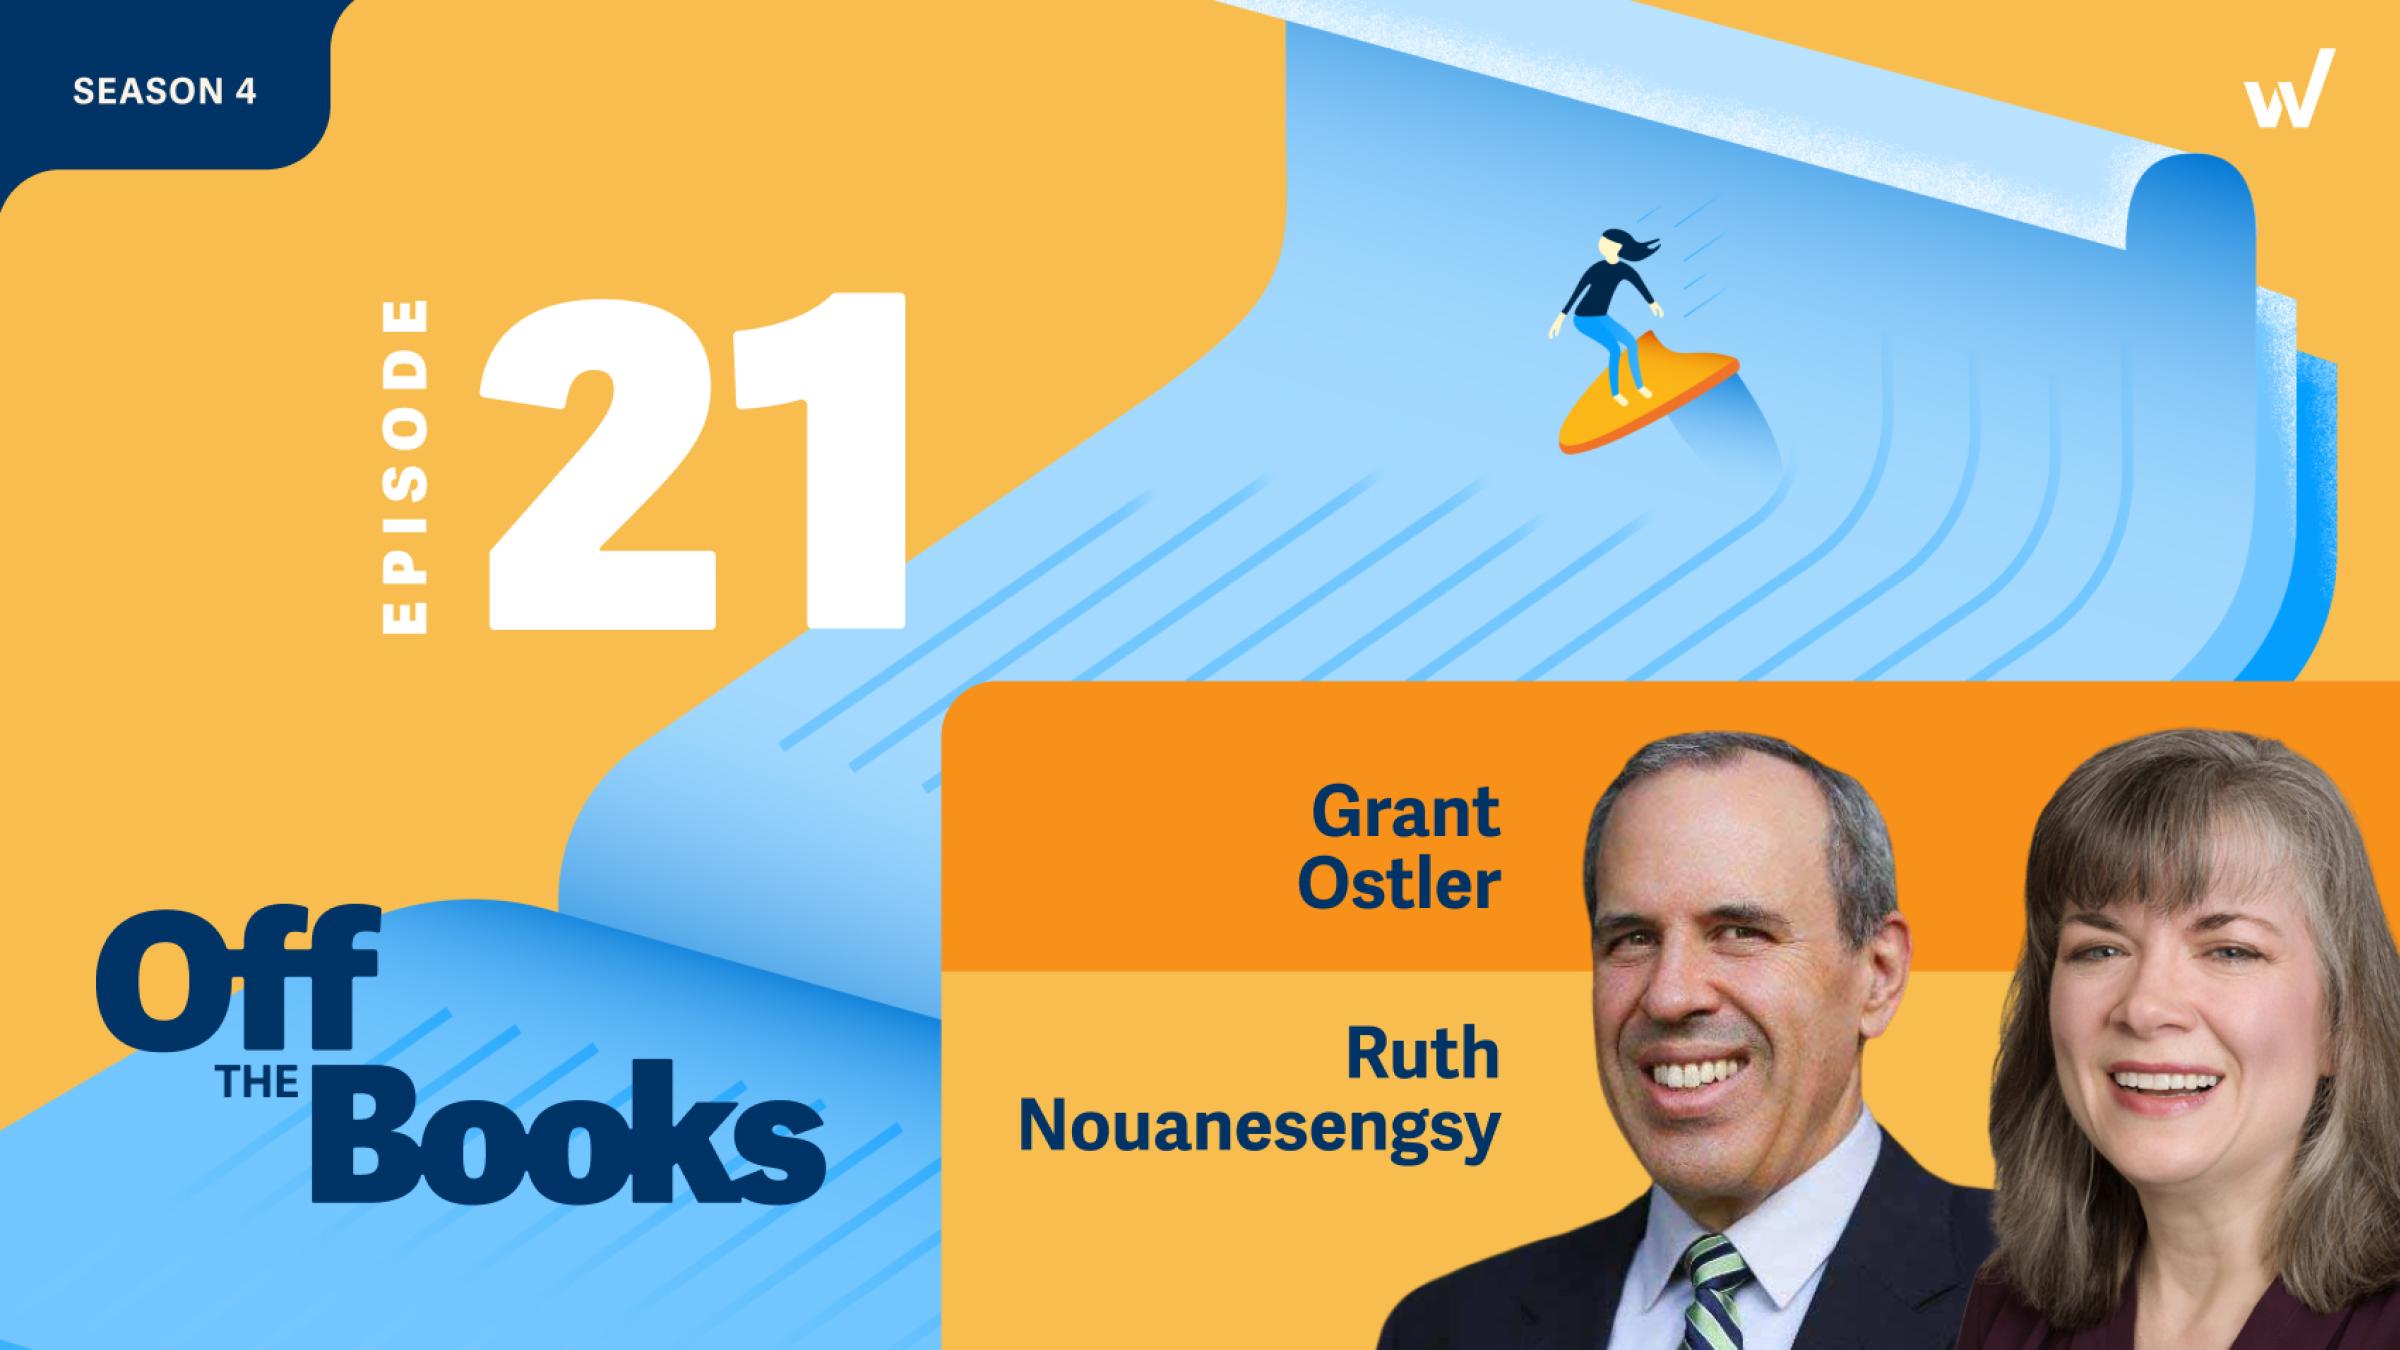 The state of internal audit: Blog recap from Off the Books Season 4, Episode 21 with Grant Ostler and Ruth Nouanesengsy